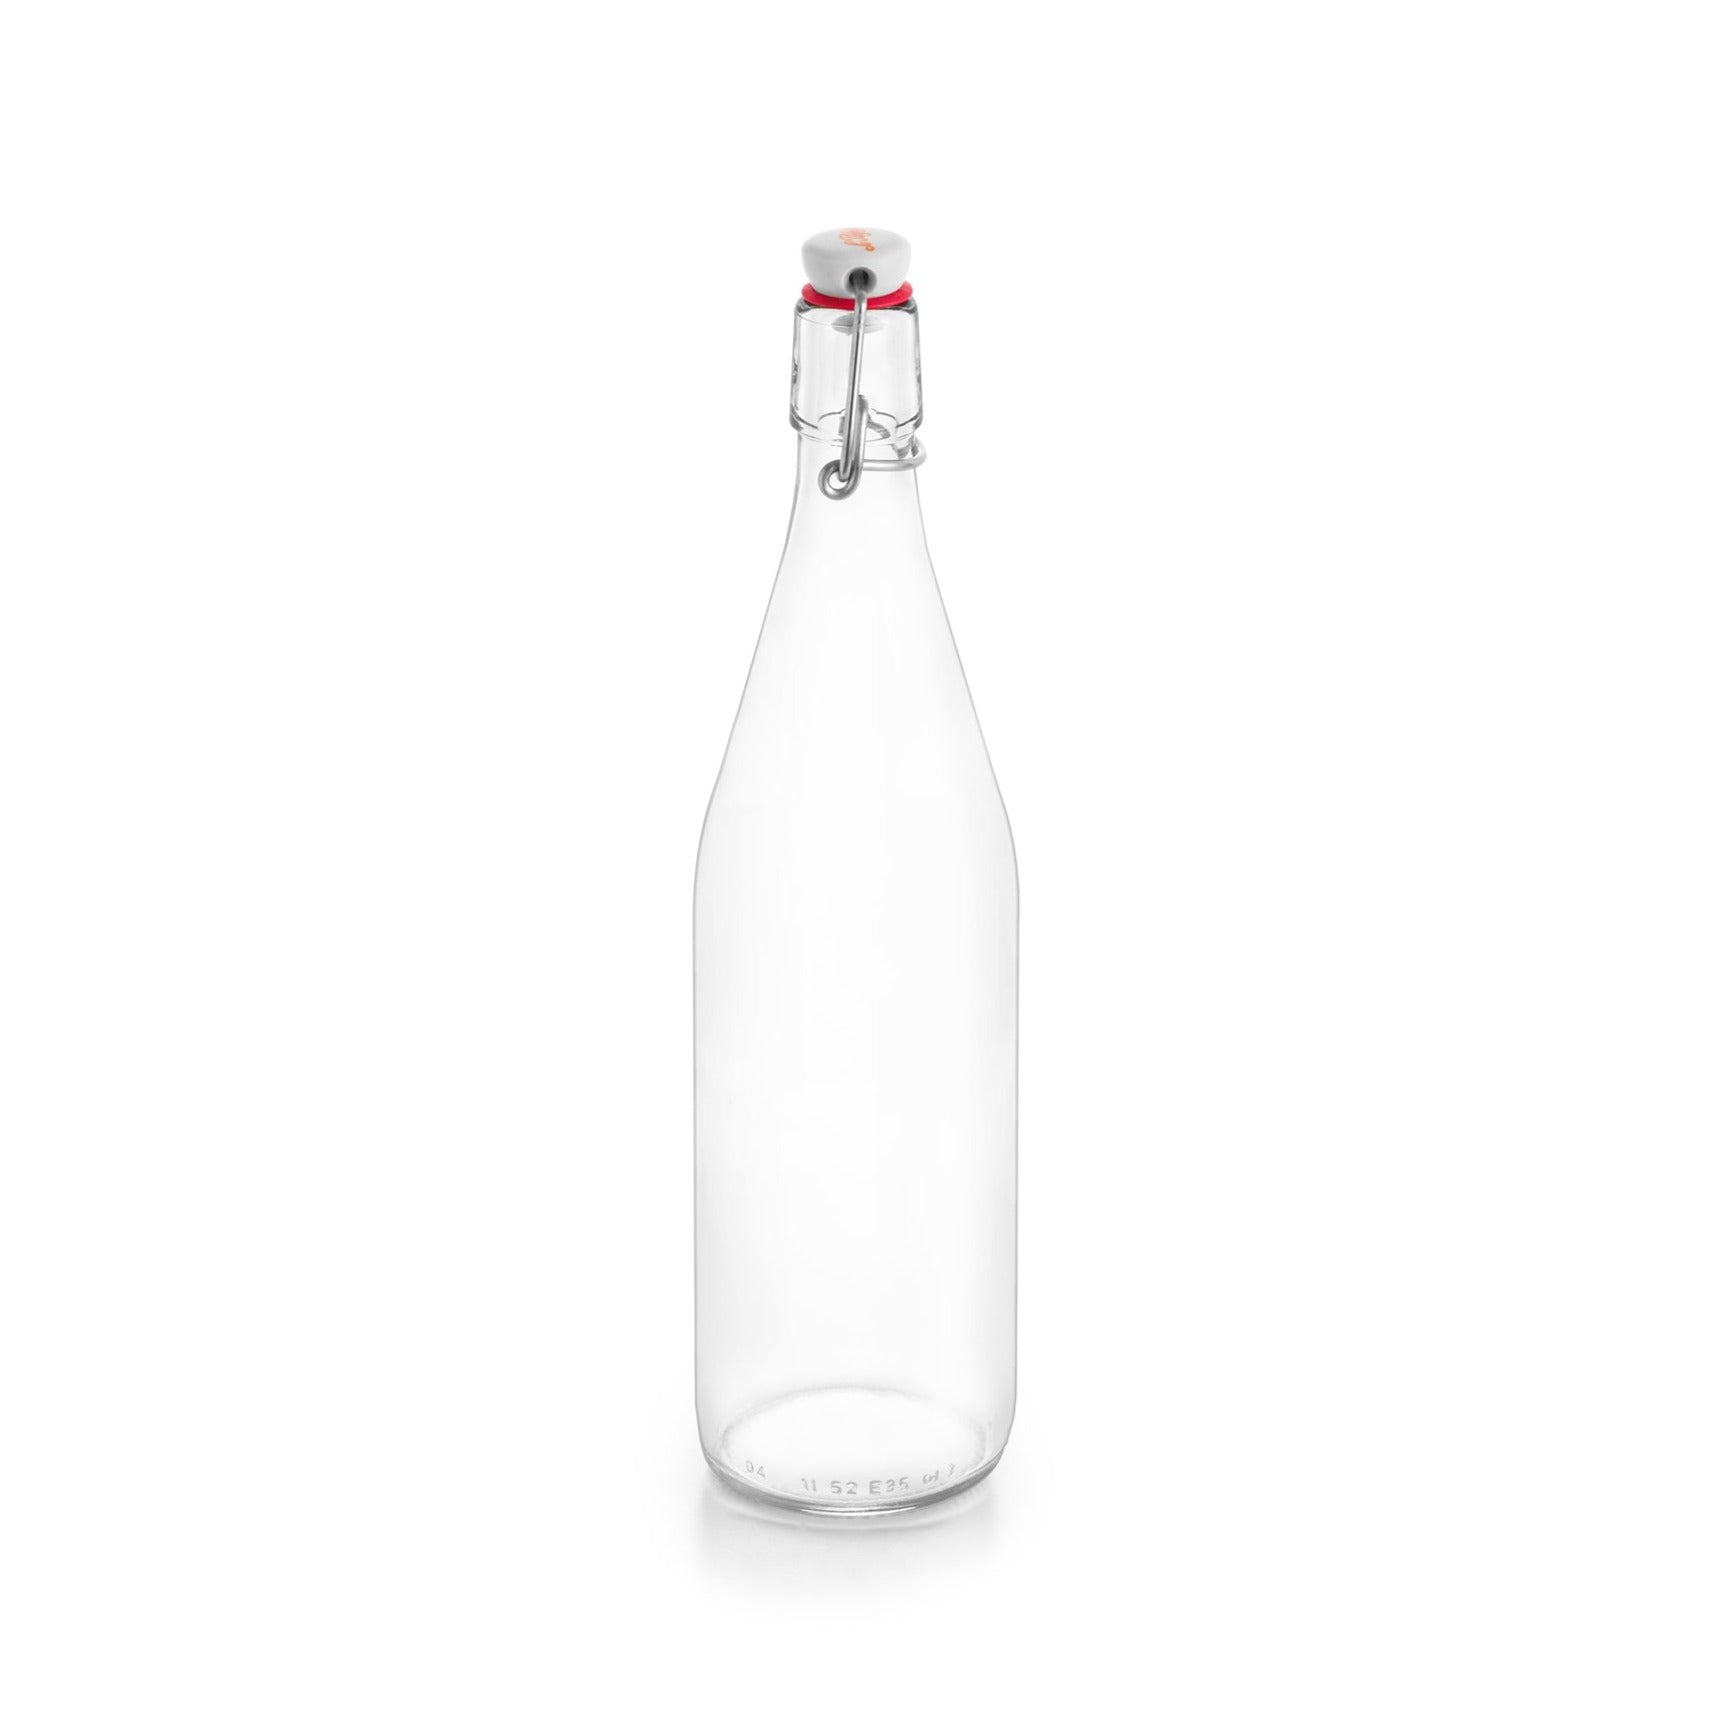 DaynaHome - BOUTEILLE VERRE pm